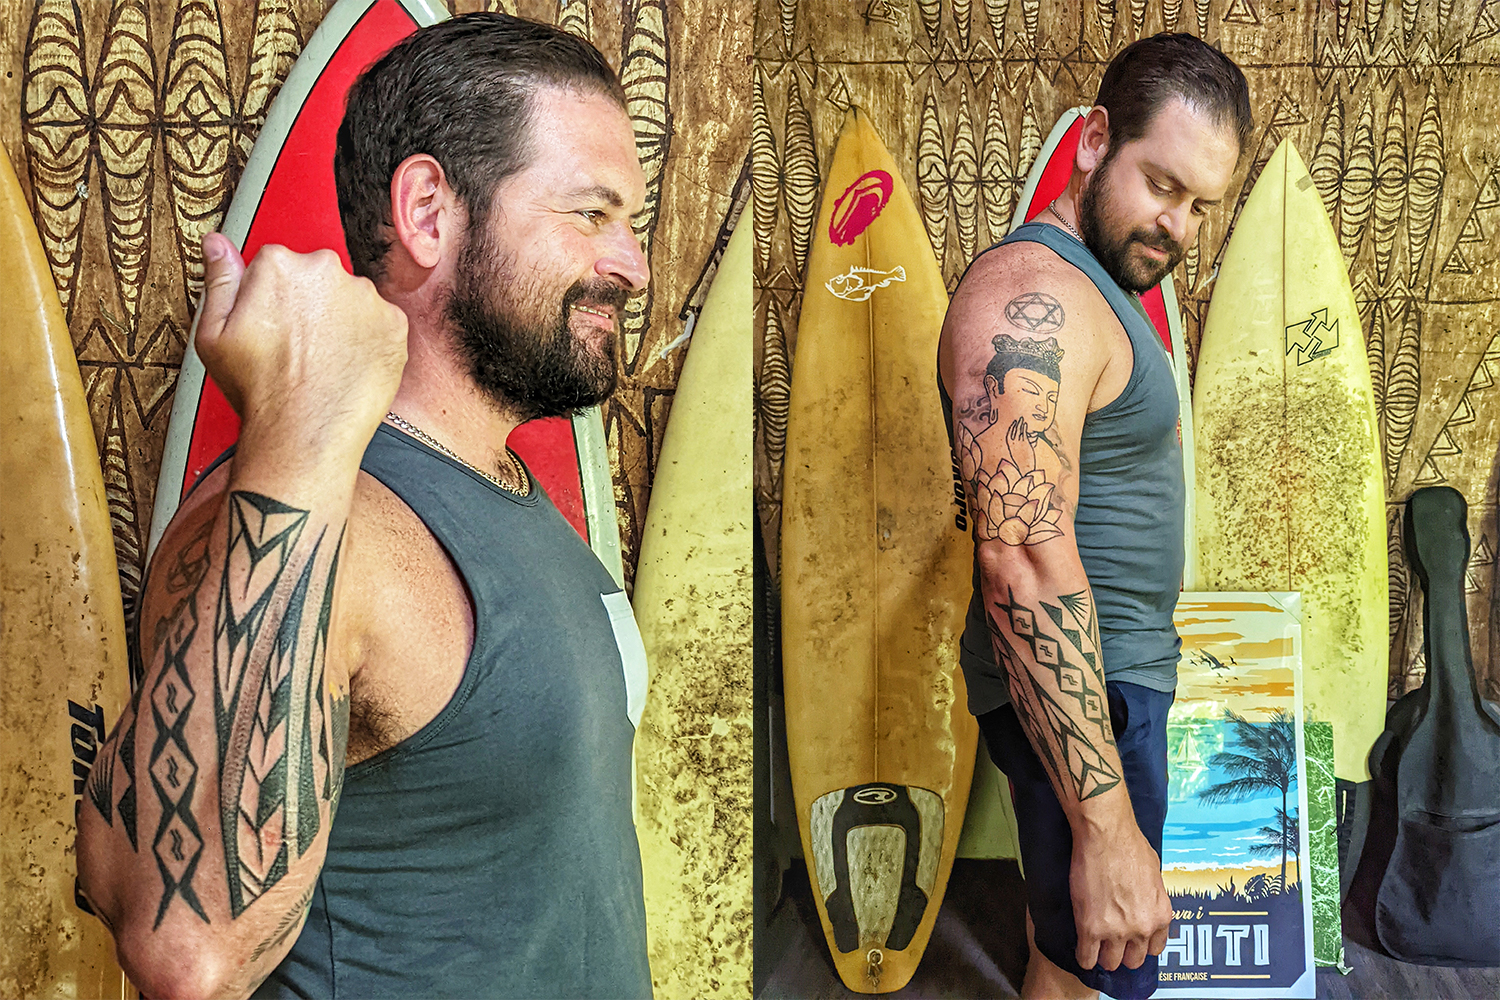 Travel writer Jake Emen showing off the tattoo he received in Tahiti using traditional Tahitian methods of tapping